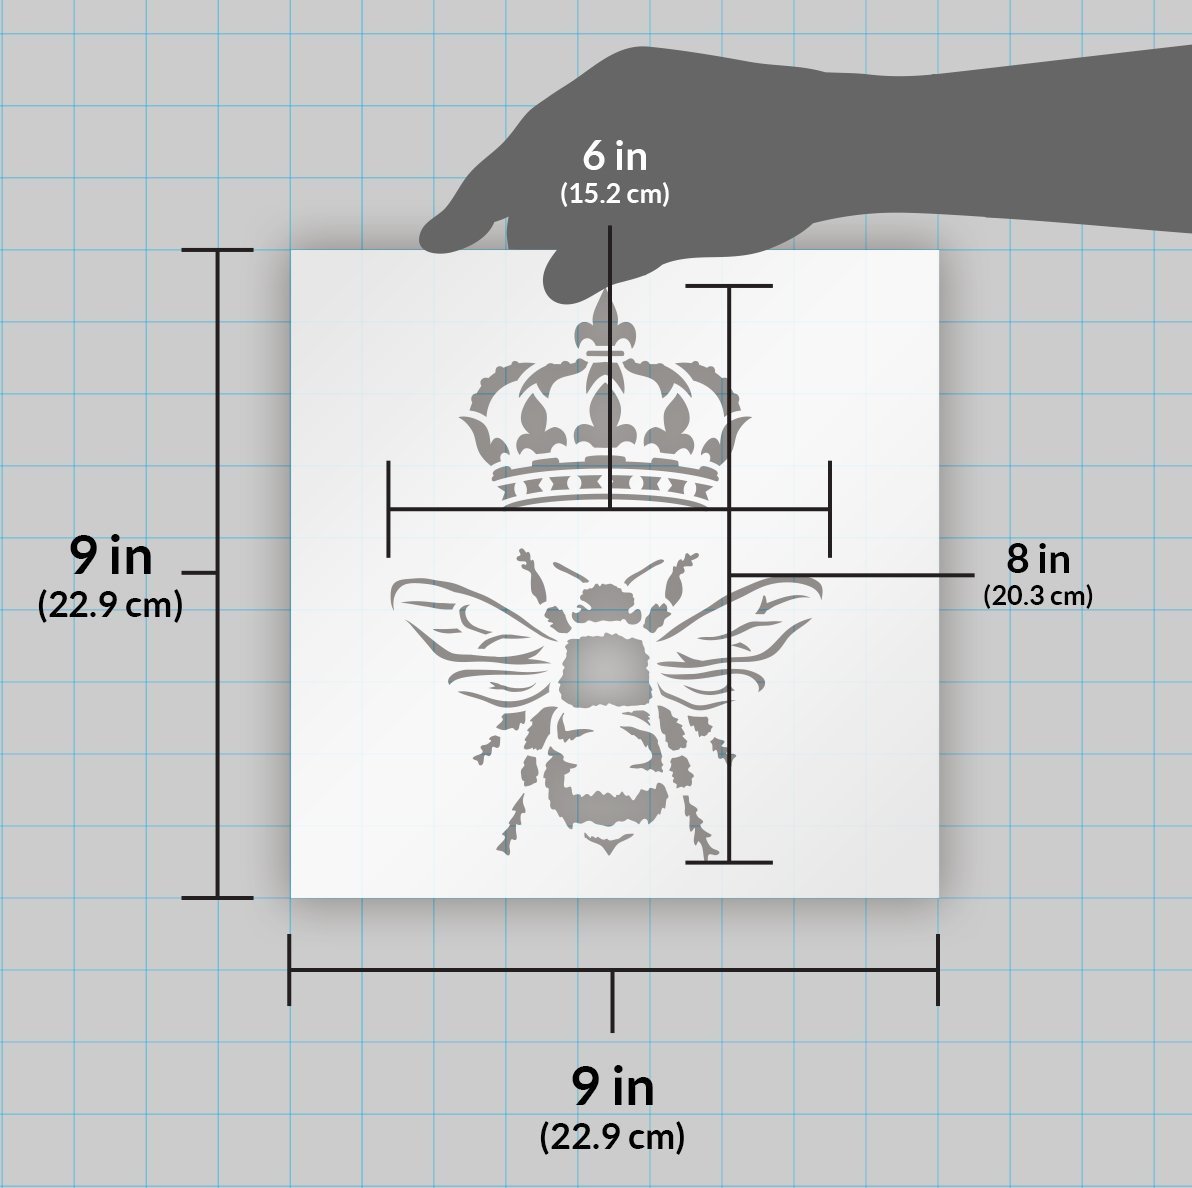 Queen Bee Stamp Set - A4 Size - Moody Mare Design – Jacatata